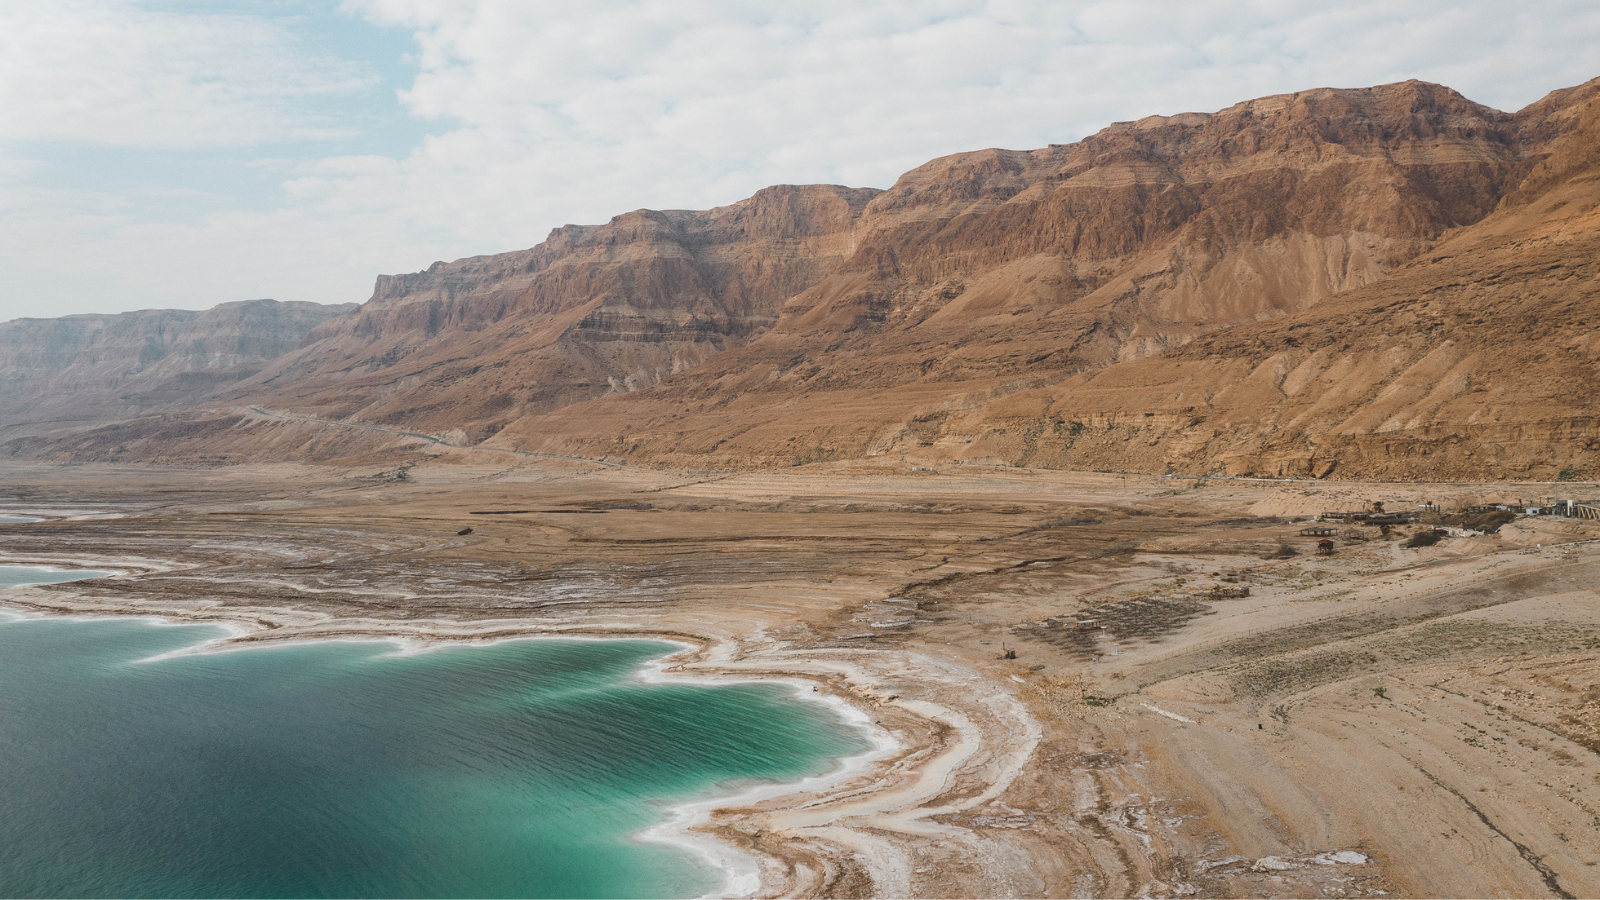 A view of the blue dead sea and surrounding mountains.